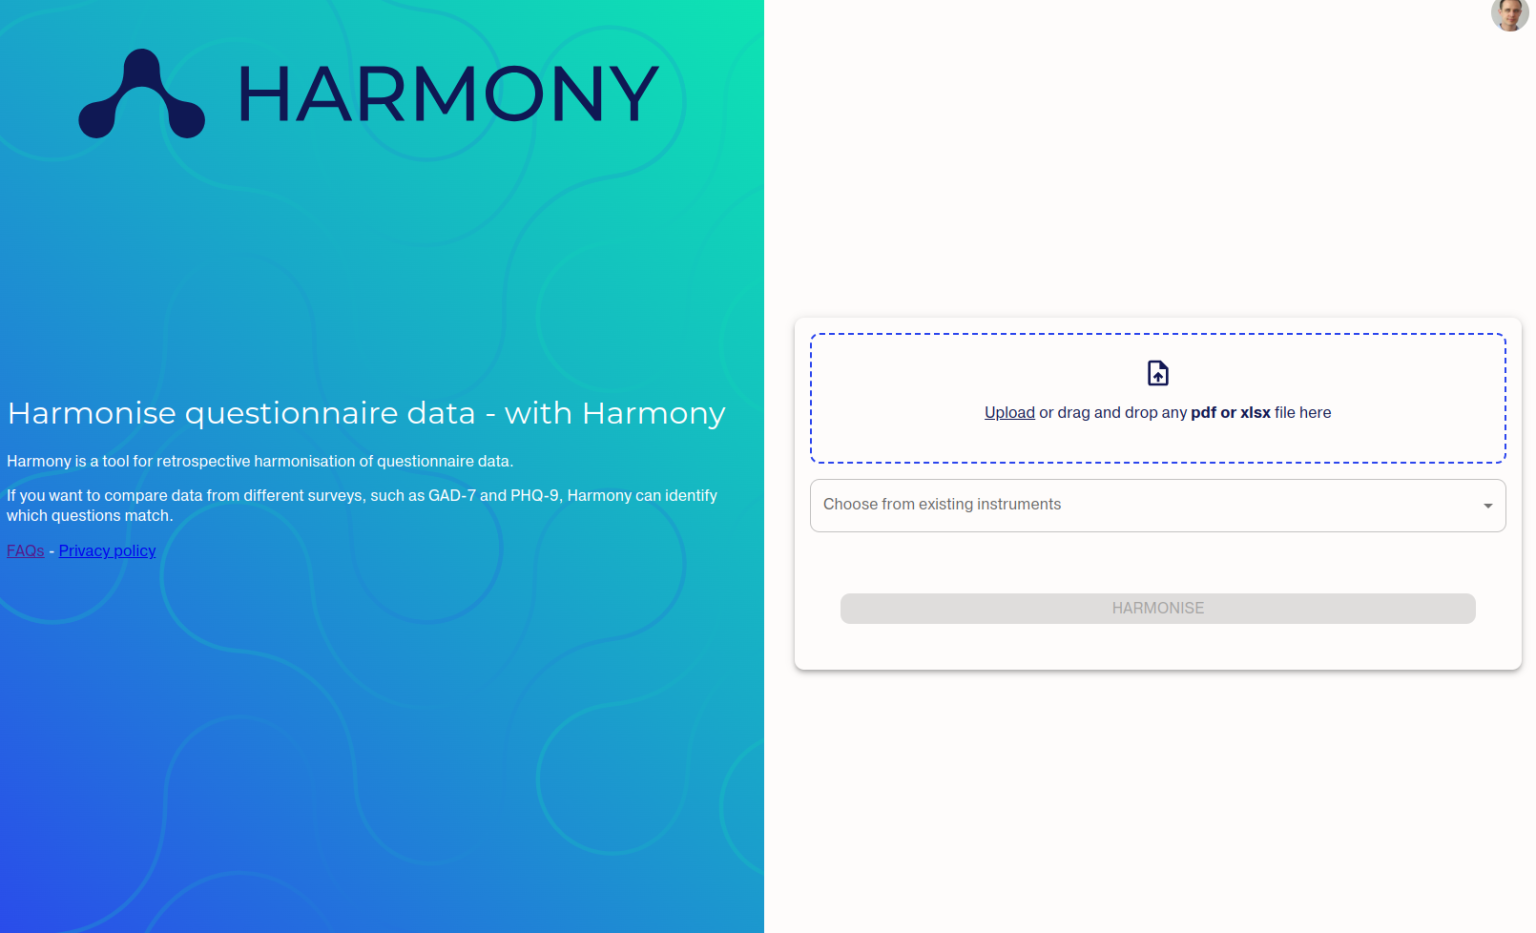 Running Harmony In Your Browser With No Internet Connection